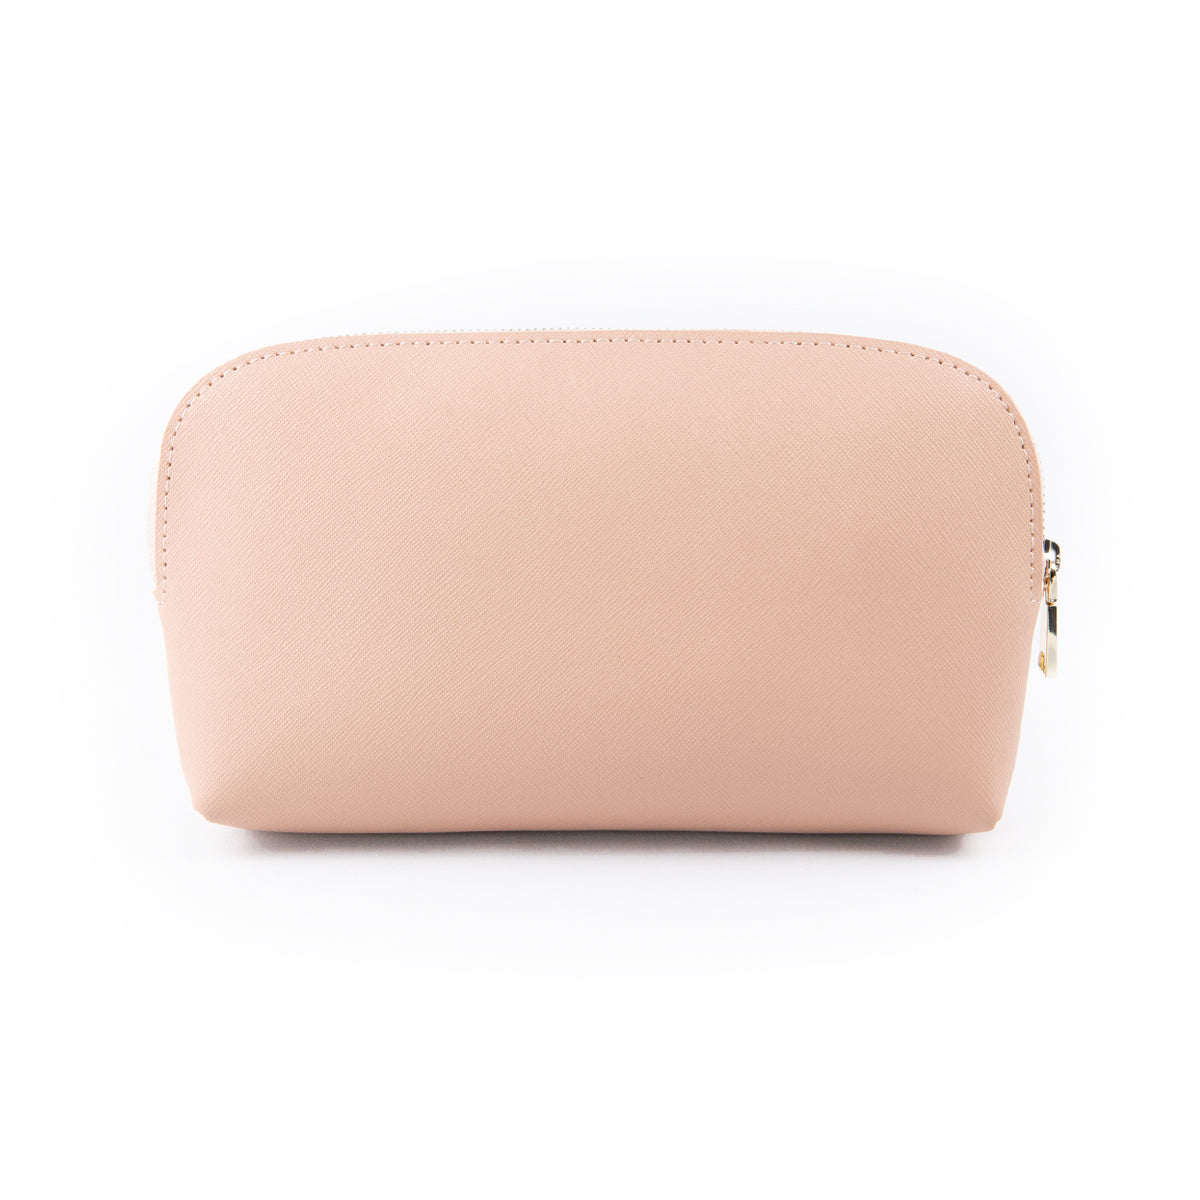 Personalised Nude Saffiano Leather Makeup Bag